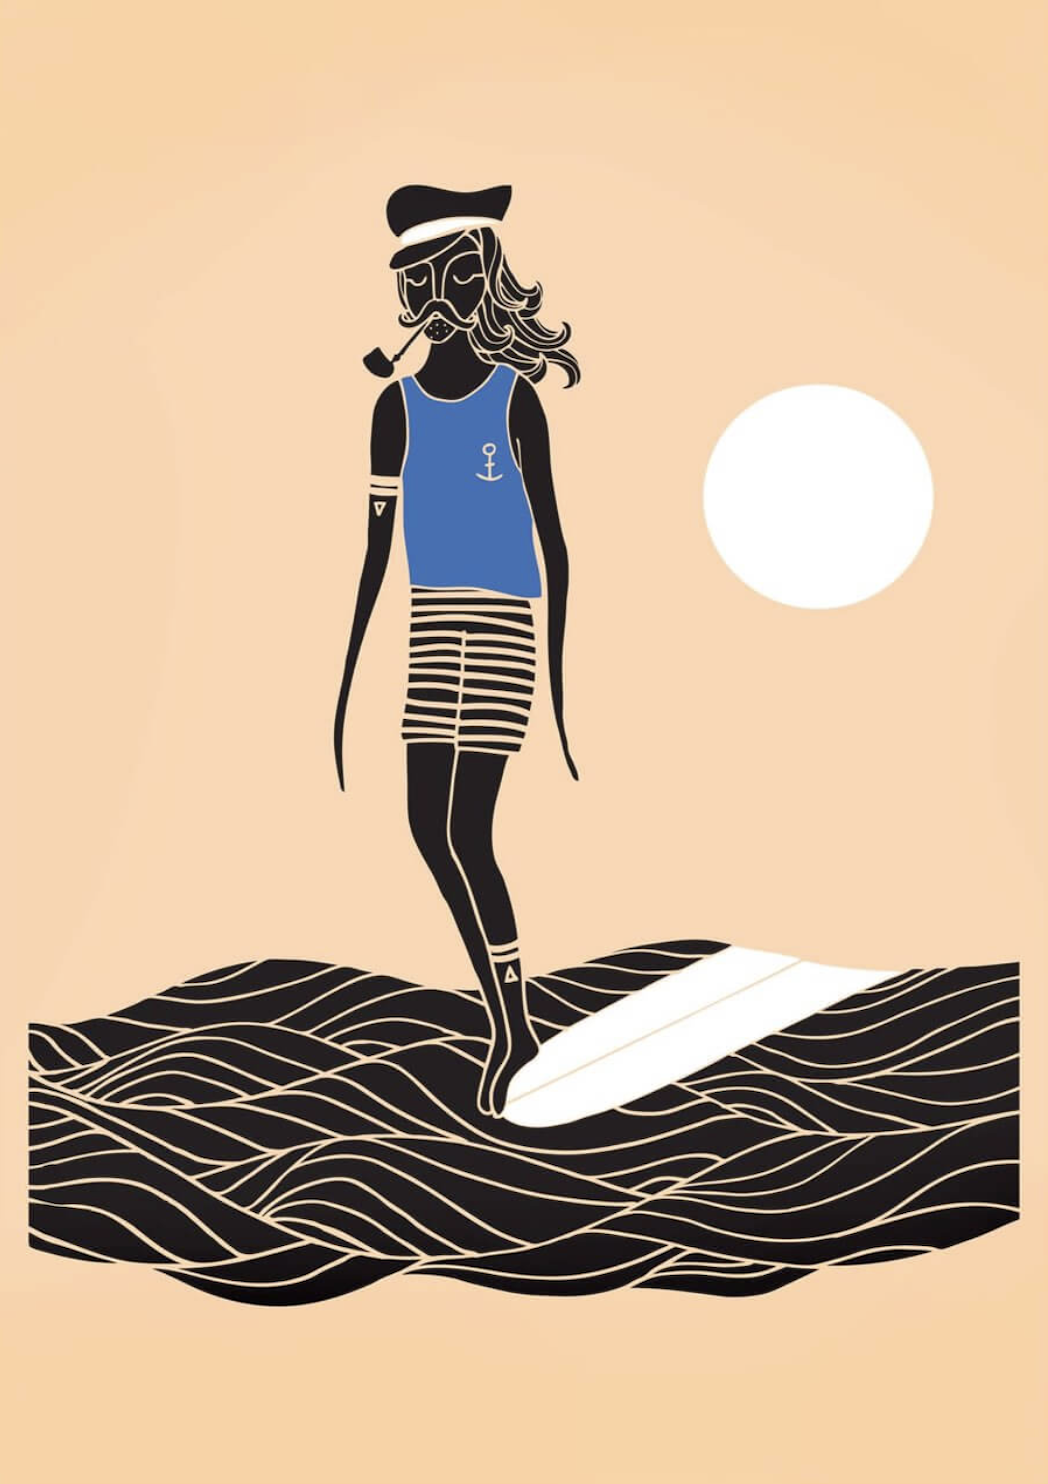 Drawing of a sailor girl standing on a surfboard in the sea